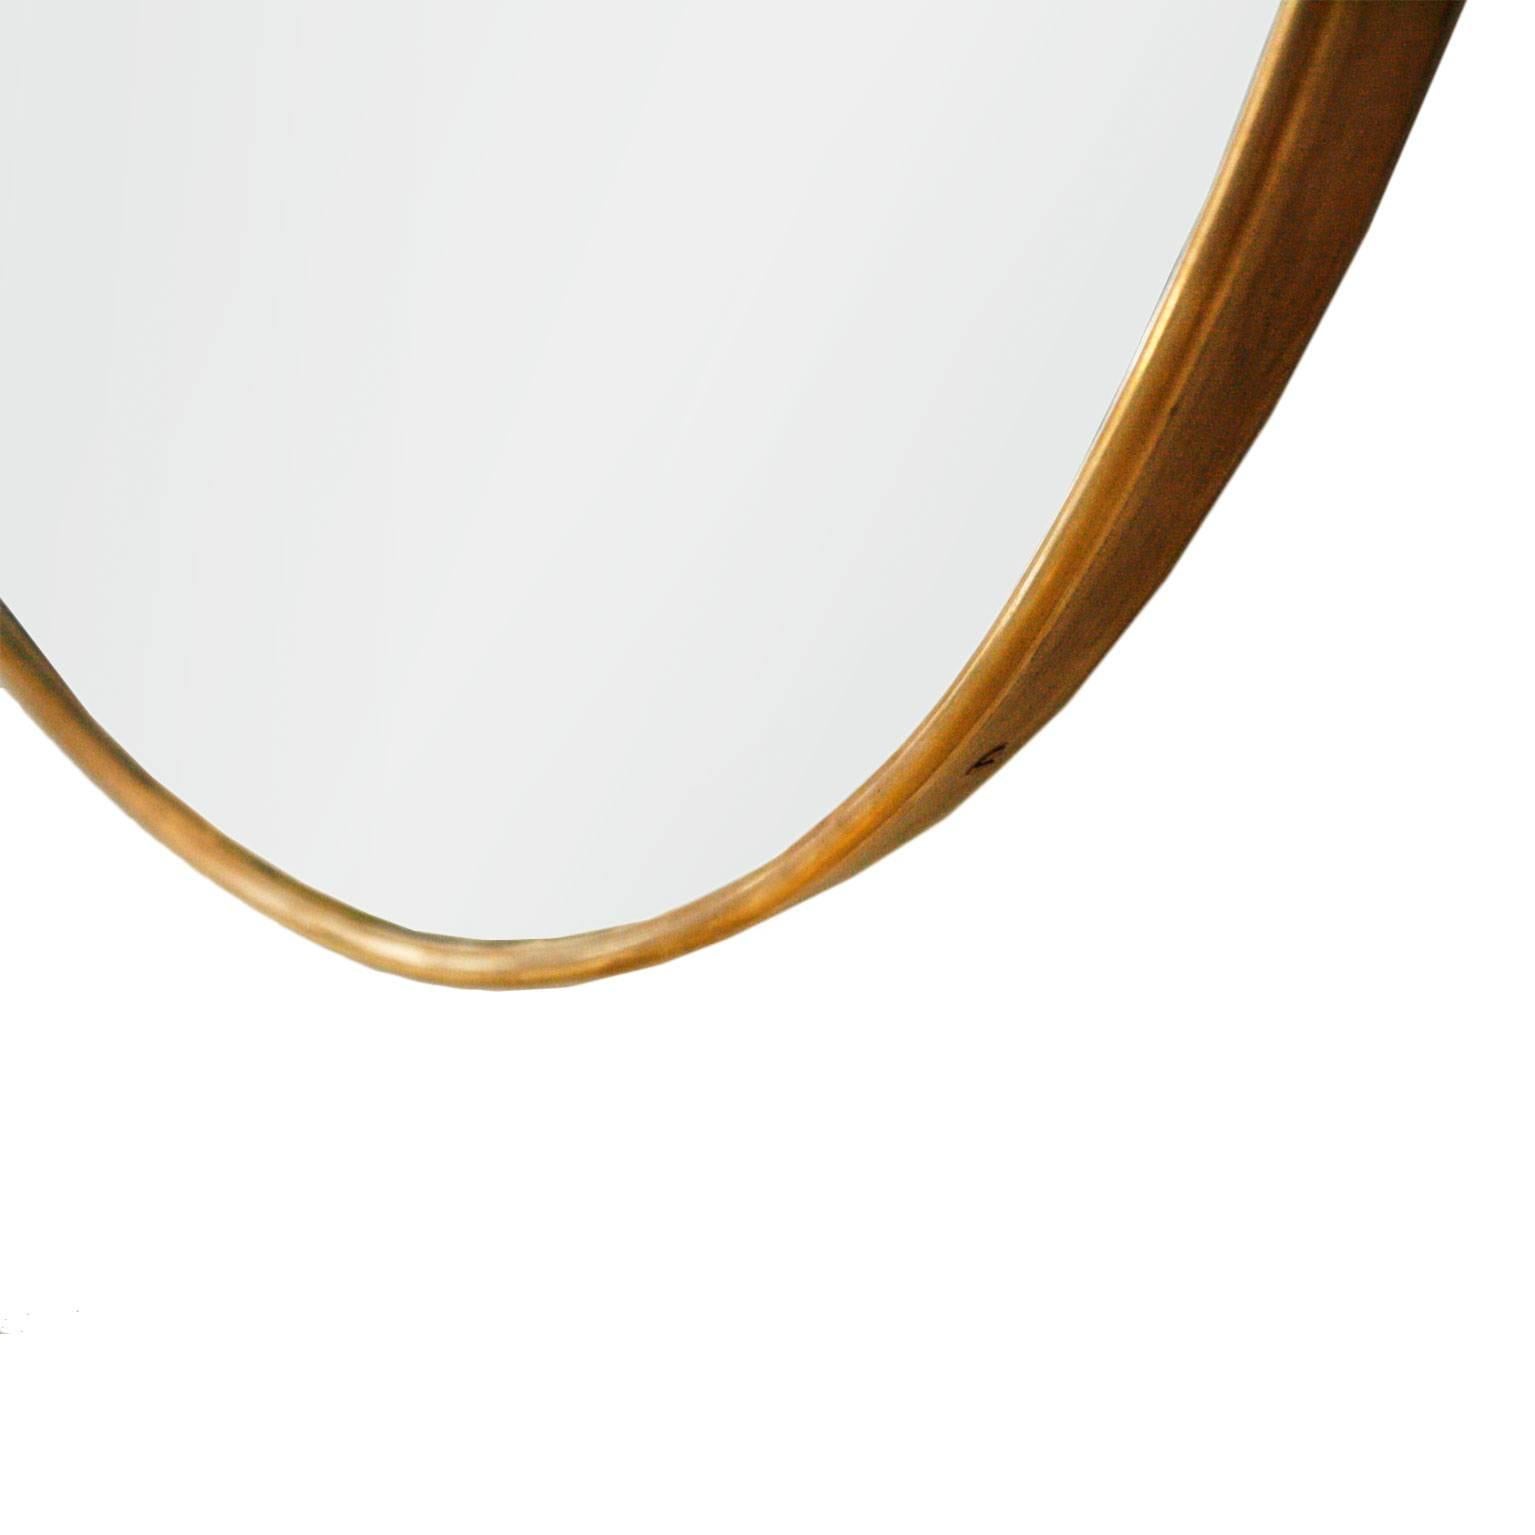 Pair of mirrors attributed to Gio Ponti, made in wood structure and frame in tube of brass.